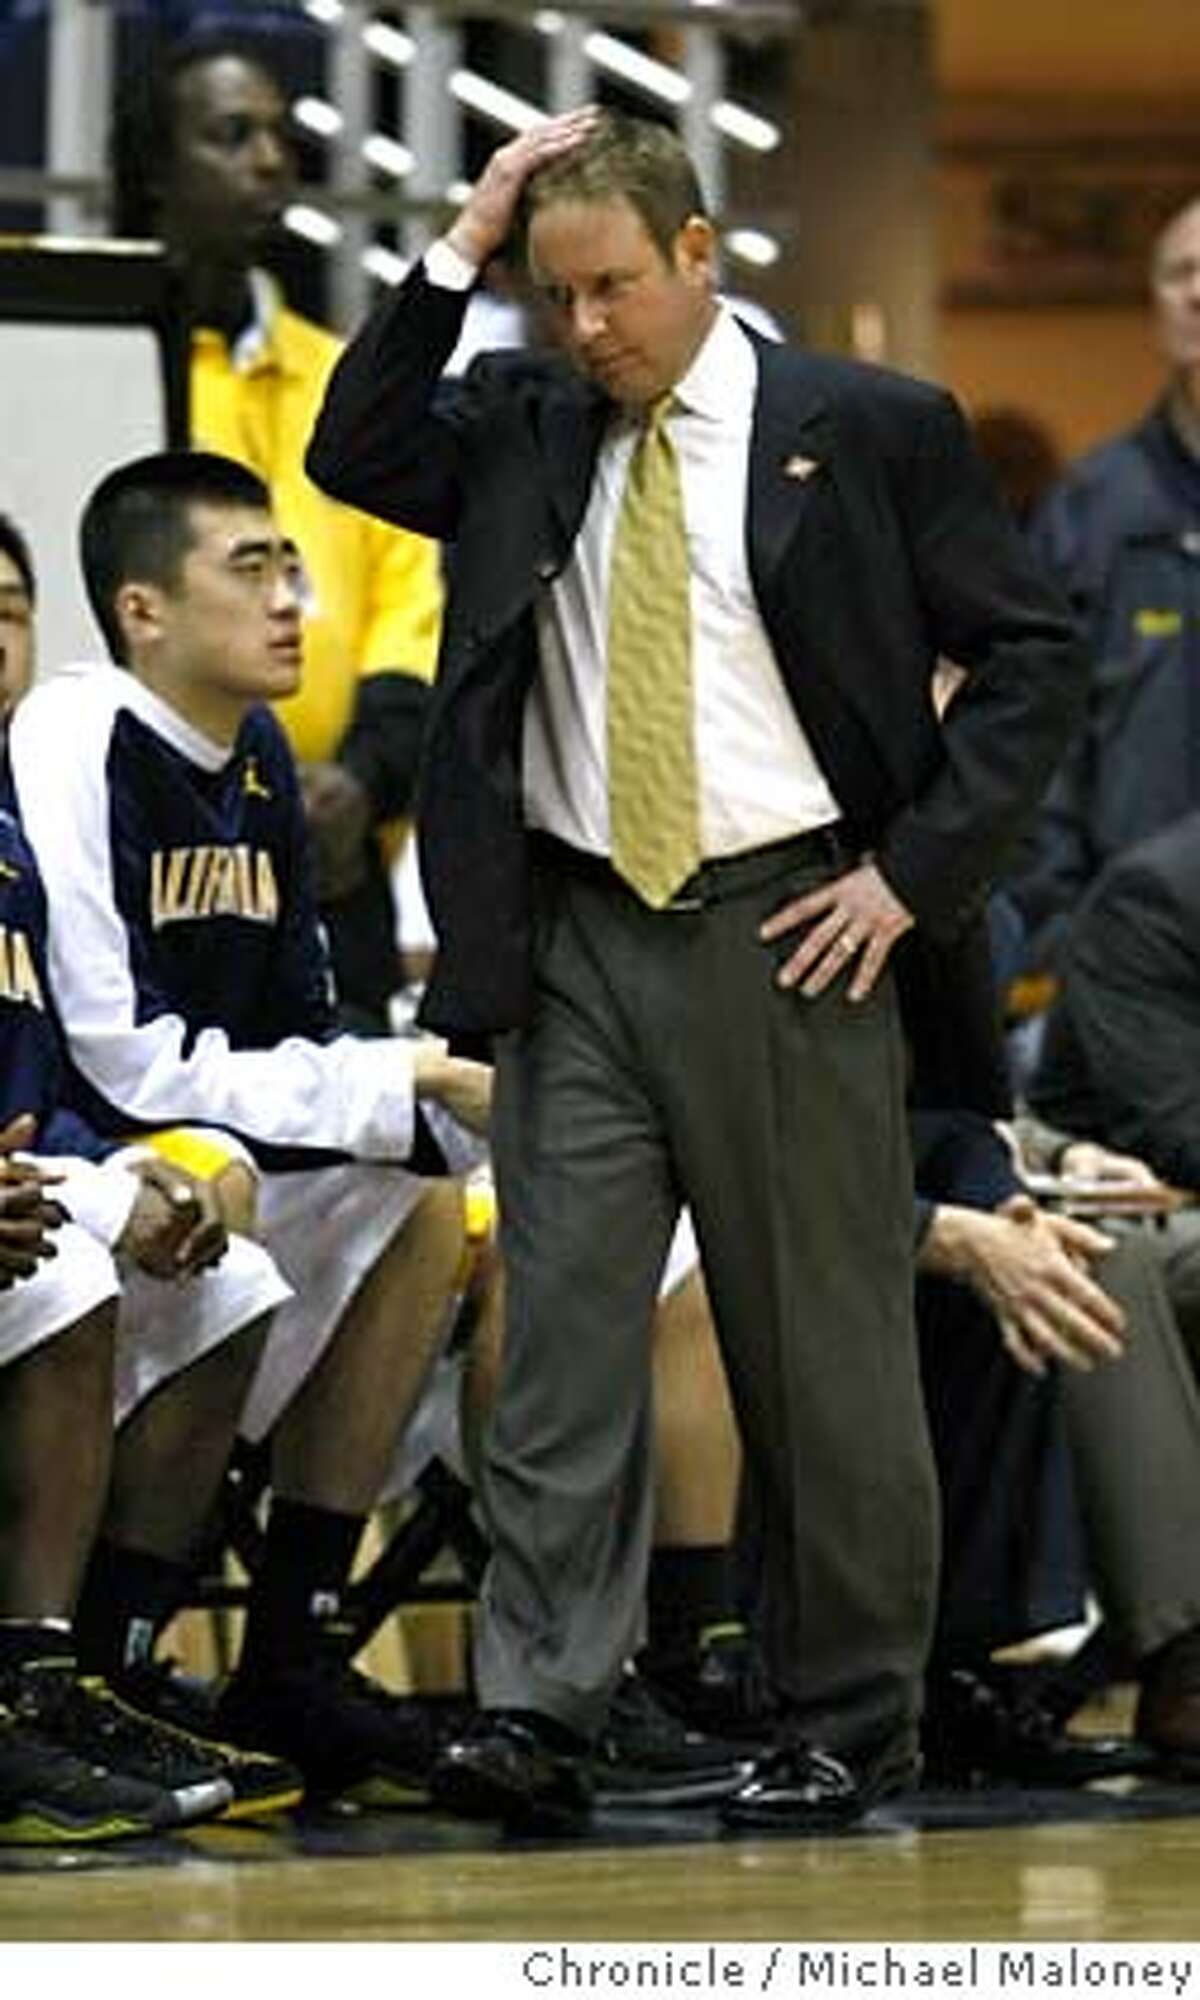 ###Live Caption:Cal Bears head coach Ben Braun paces the sidelines. The Cal Bears men's basketball team hosts the New Mexico Lobos in the first round of the National Invitation Tournament on Wednesday, March18, 2008 at Haas Pavilion on the UC Berkeley (Calif.) campus. The Bears won 68-66. Photo by Michael Maloney / San Francisco Chronicle###Caption History:Cal Bears head coach Ben Braun paces the sidelines. The Cal Bears men's basketball team hosts the New Mexico Lobos in the first round of the National Invitation Tournament on Wednesday, March18, 2008 at Haas Pavilion on the UC Berkeley (Calif.) campus. The Bears won 68-66. Photo by Michael Maloney / San Francisco Chronicle###Notes:***roster###Special Instructions:MANDATORY CREDIT FOR PHOTOG AND SAN FRANCISCO CHRONICLE/NO SALES-MAGS OUT